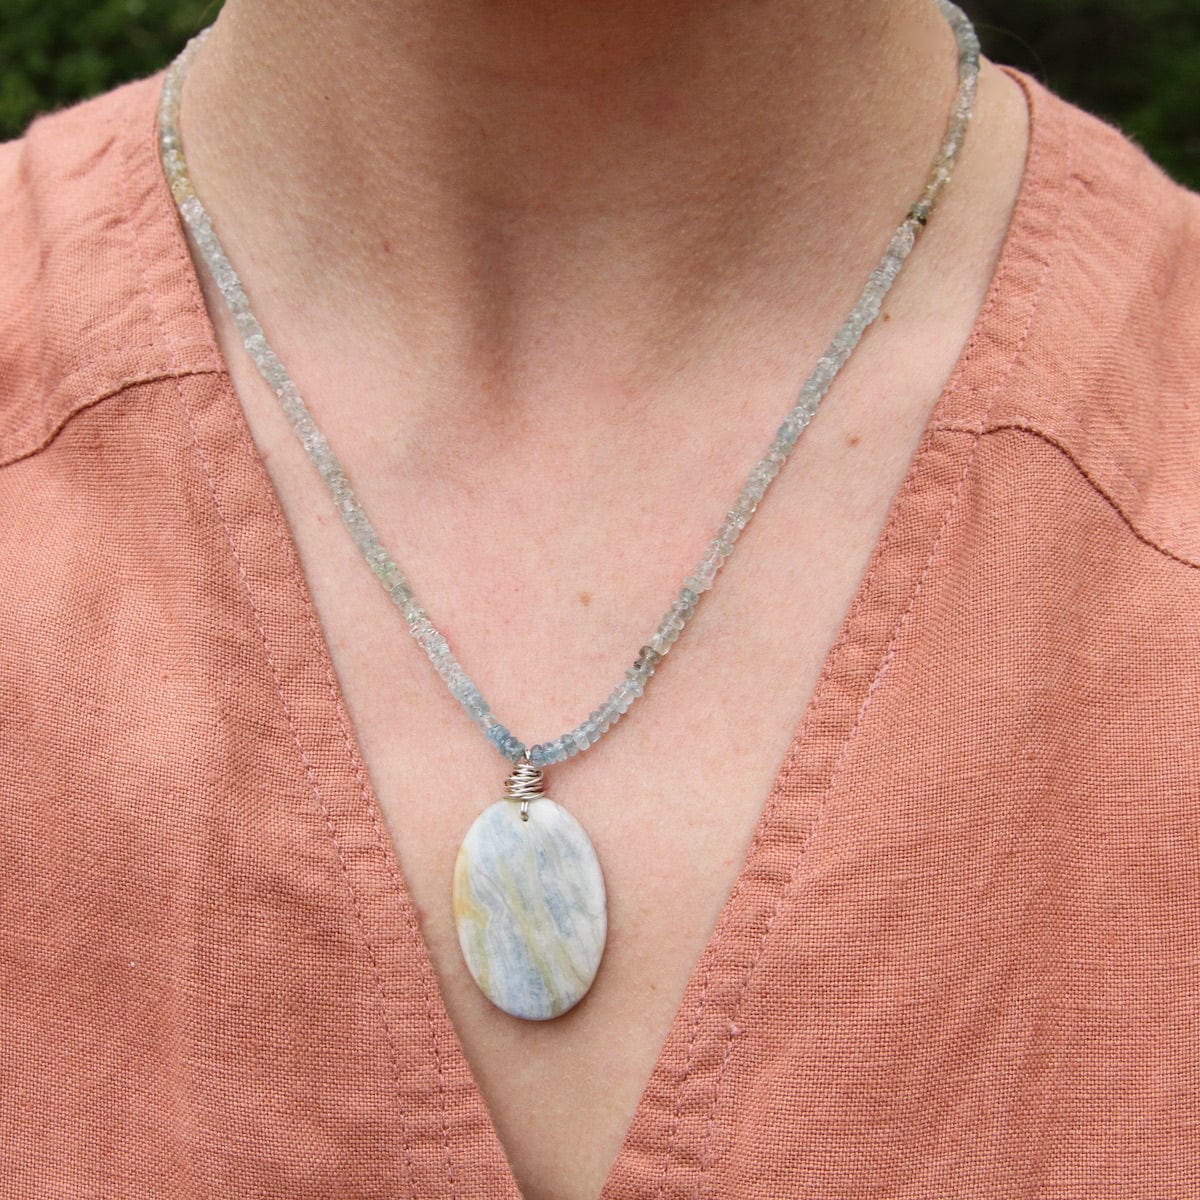 NKL Strung Shaded Aquamarine with Argonite Pendant Necklace